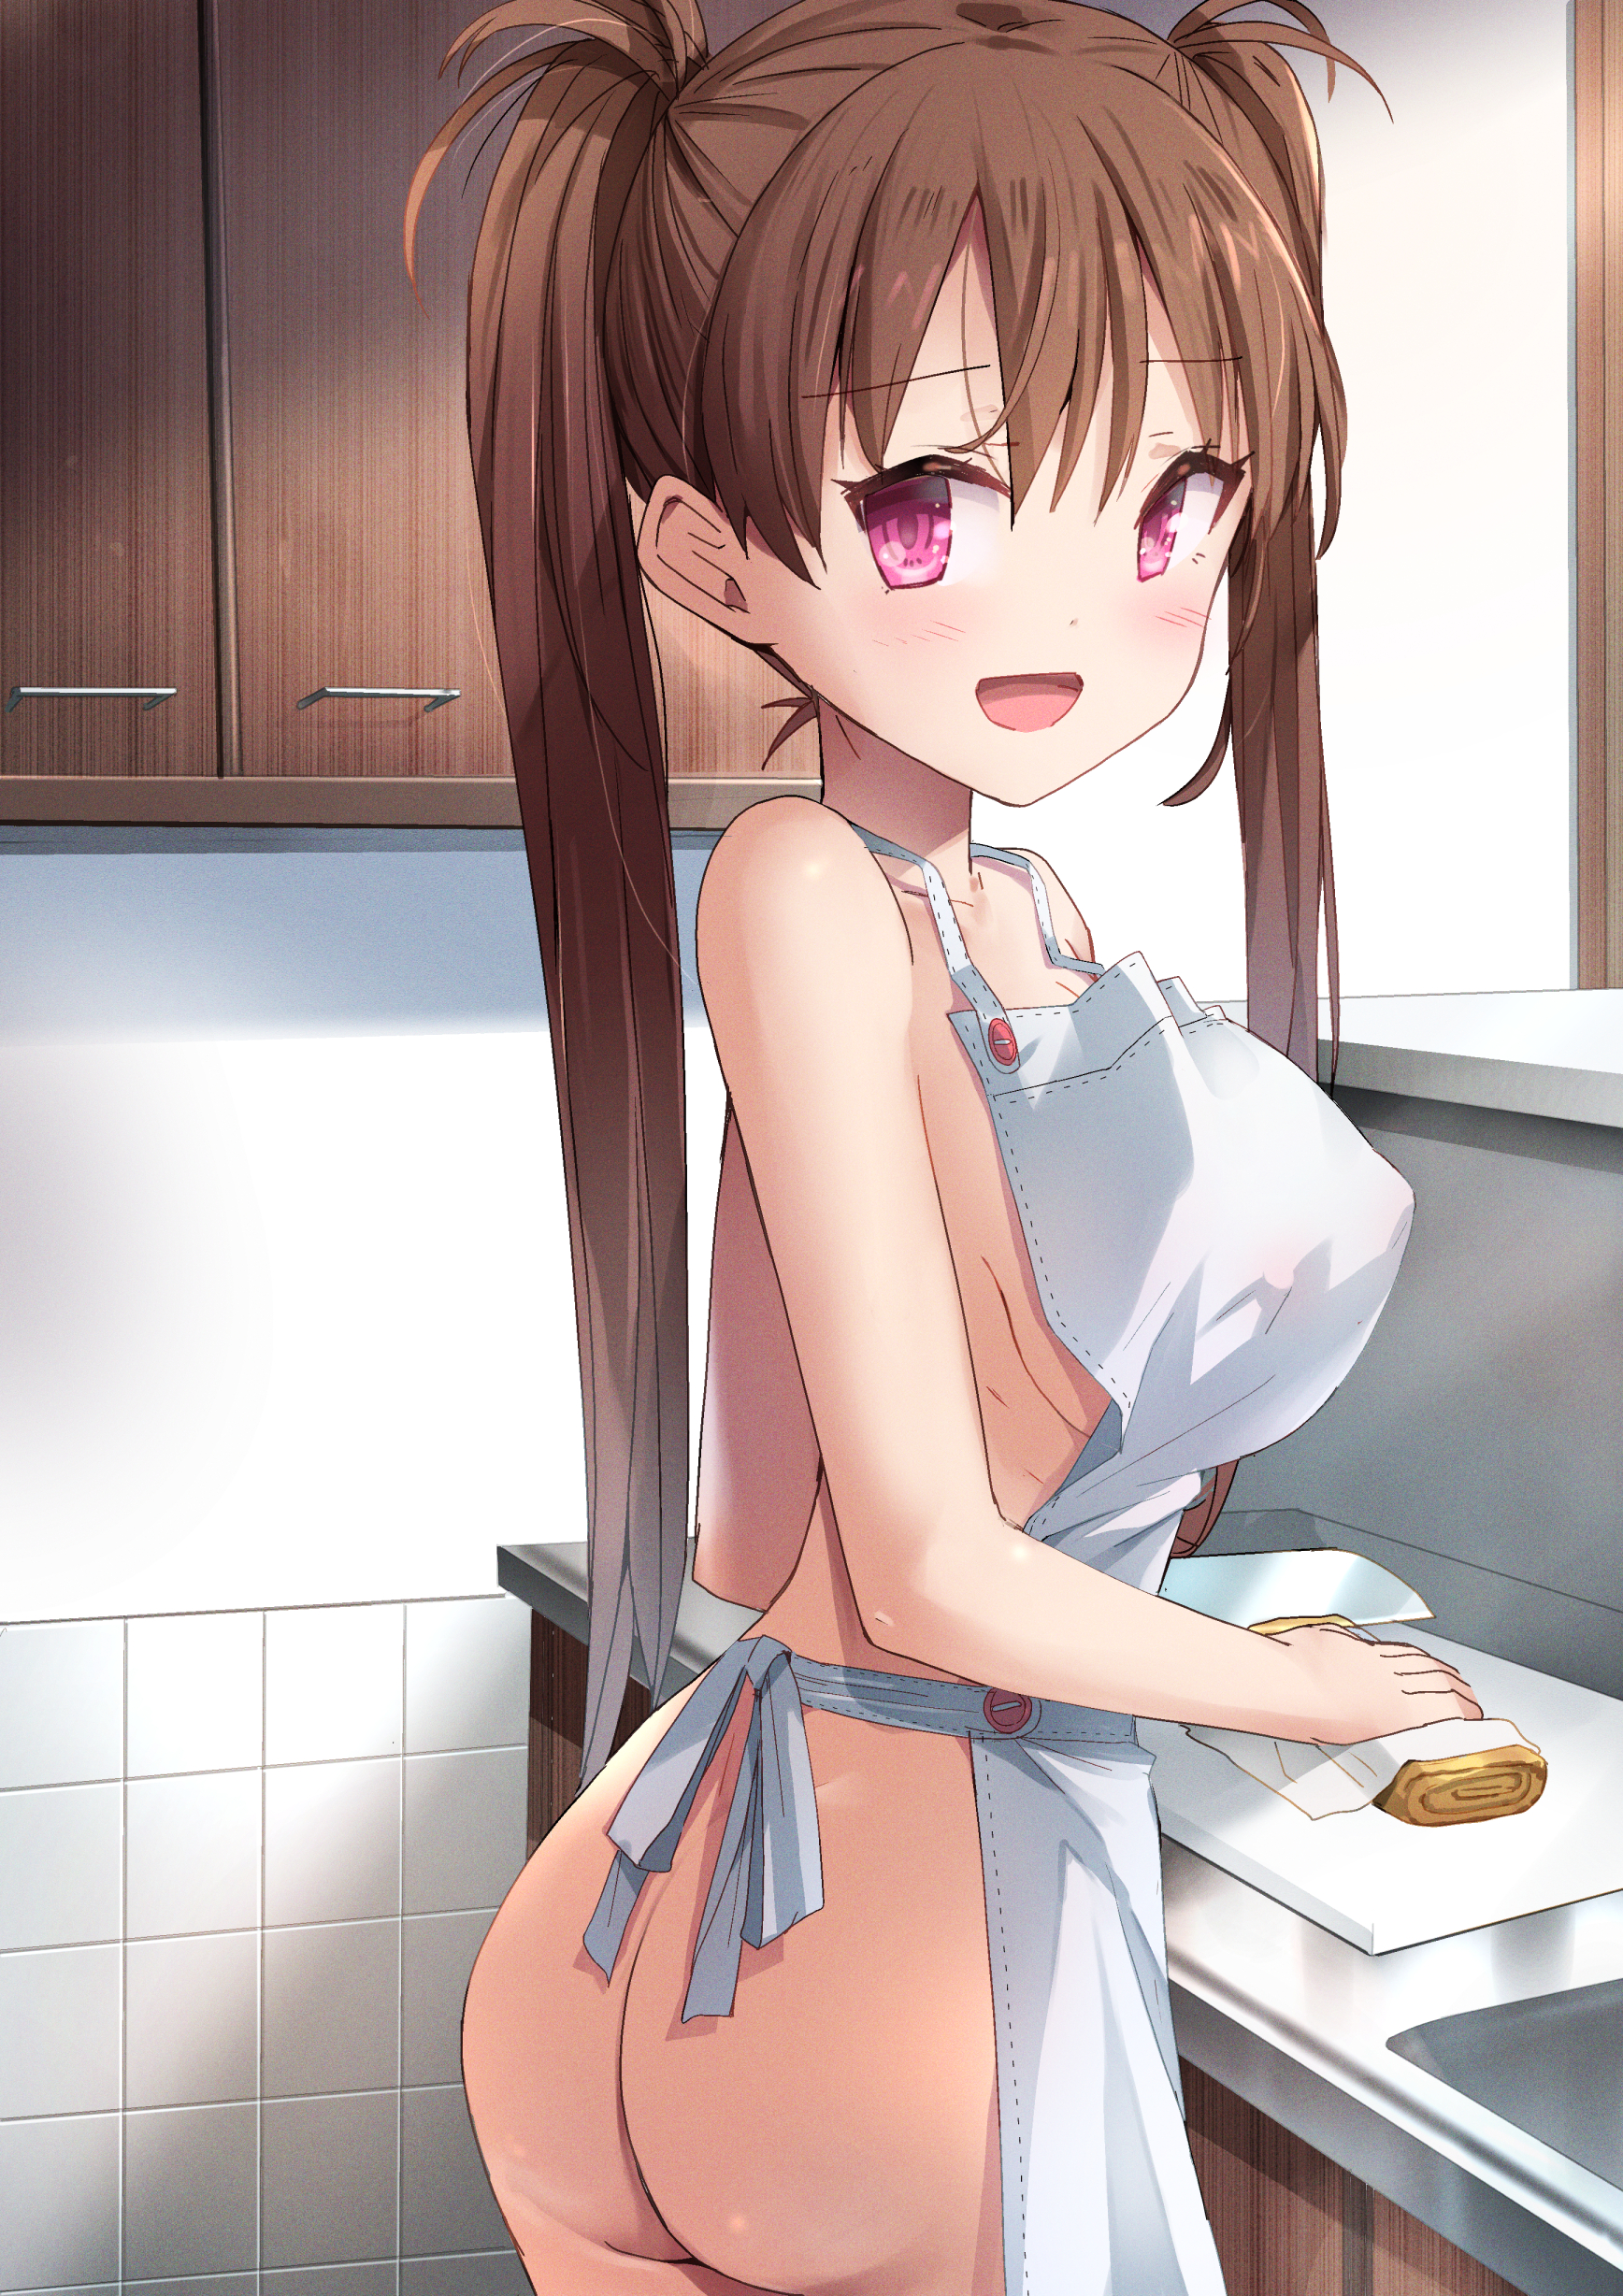 Naked Apron Twintailed Cutie [Original]